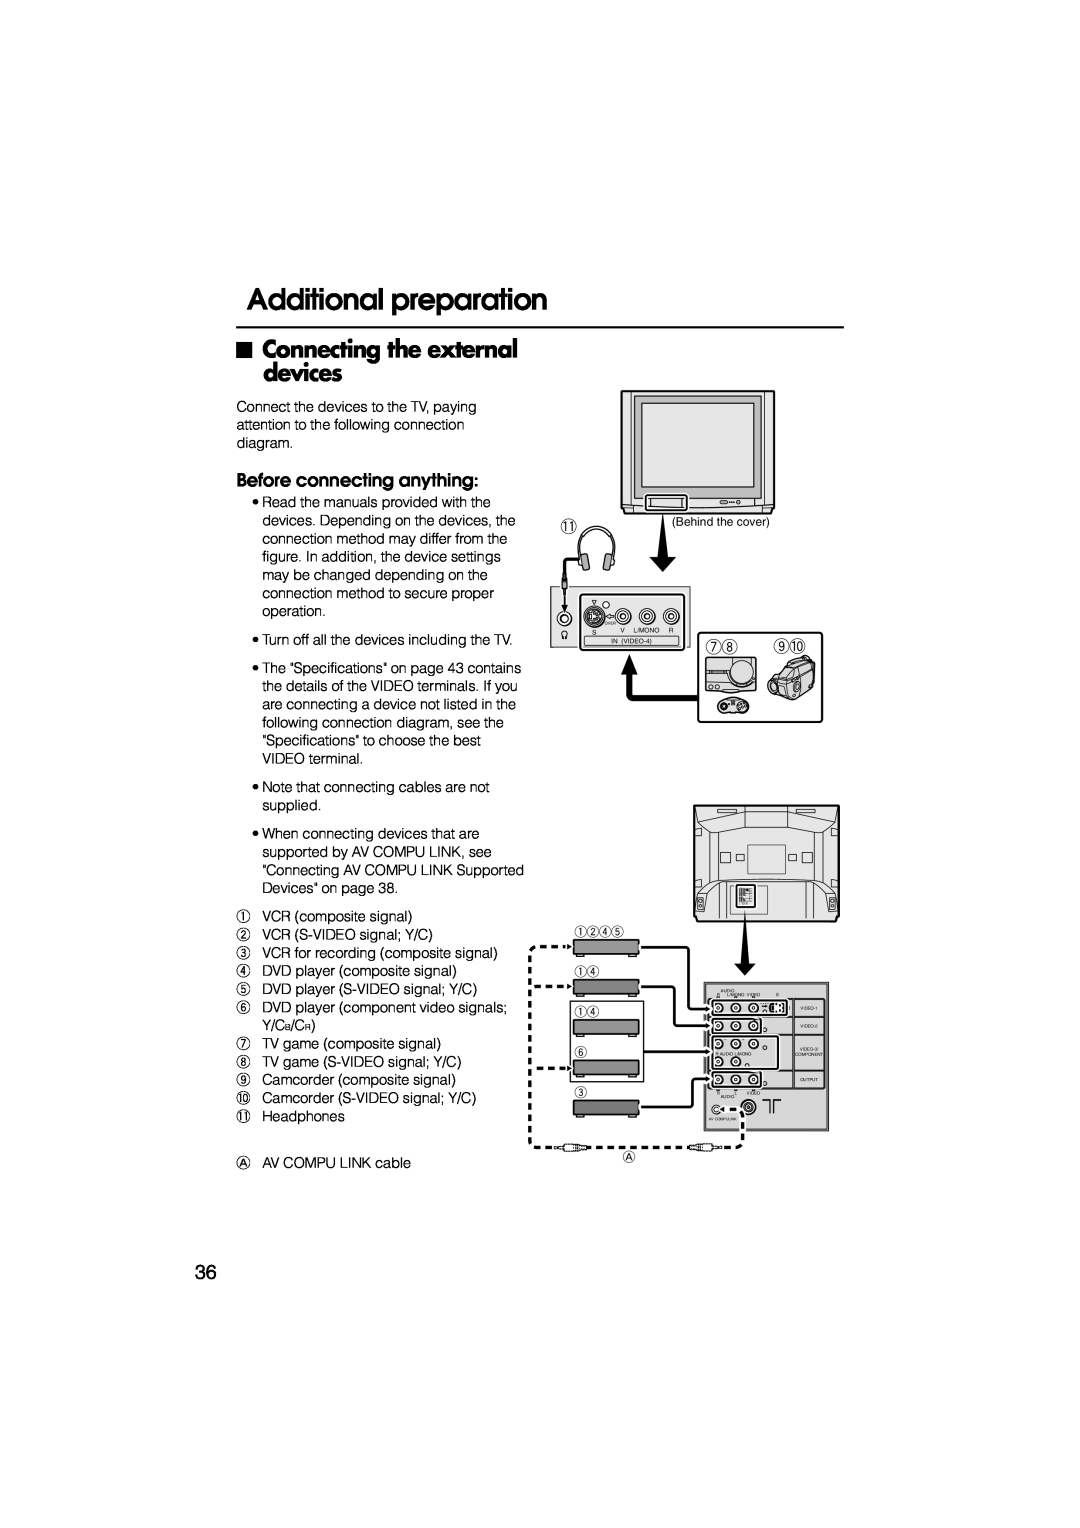 JVC HV-L34PRO, HV-L29PRO manual Additional preparation, Connecting the external devices, Before connecting anything 